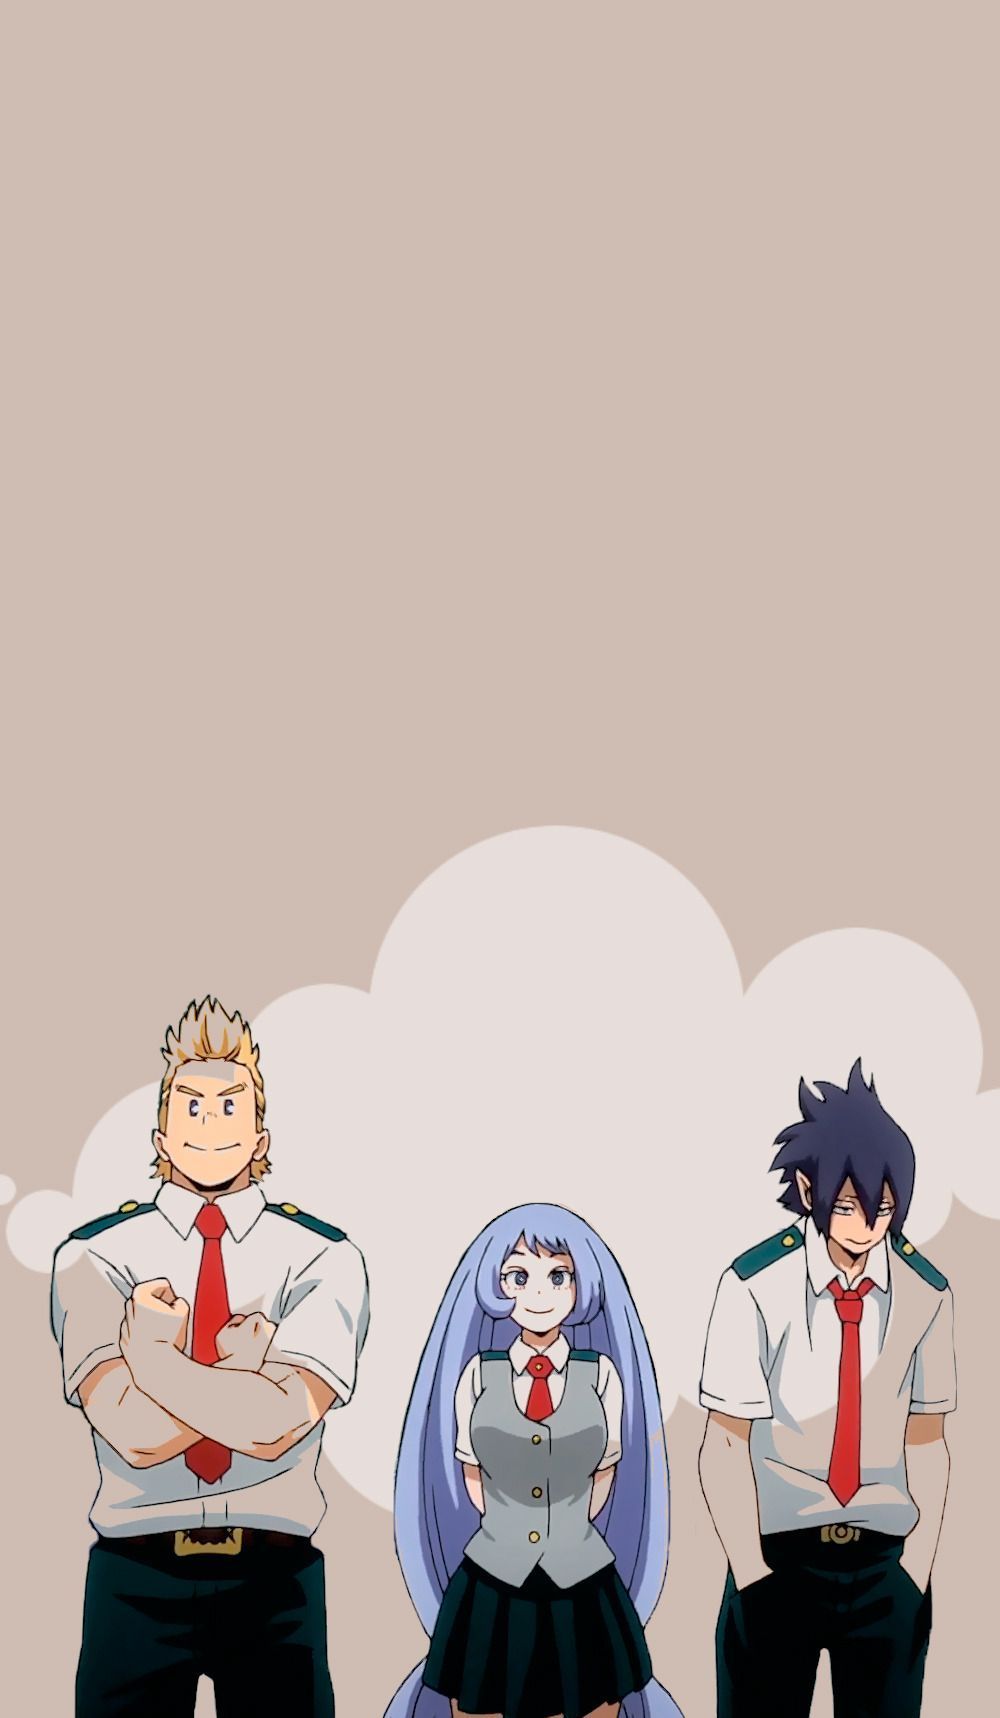 Big Three Anime Wallpapers - Wallpaper Cave